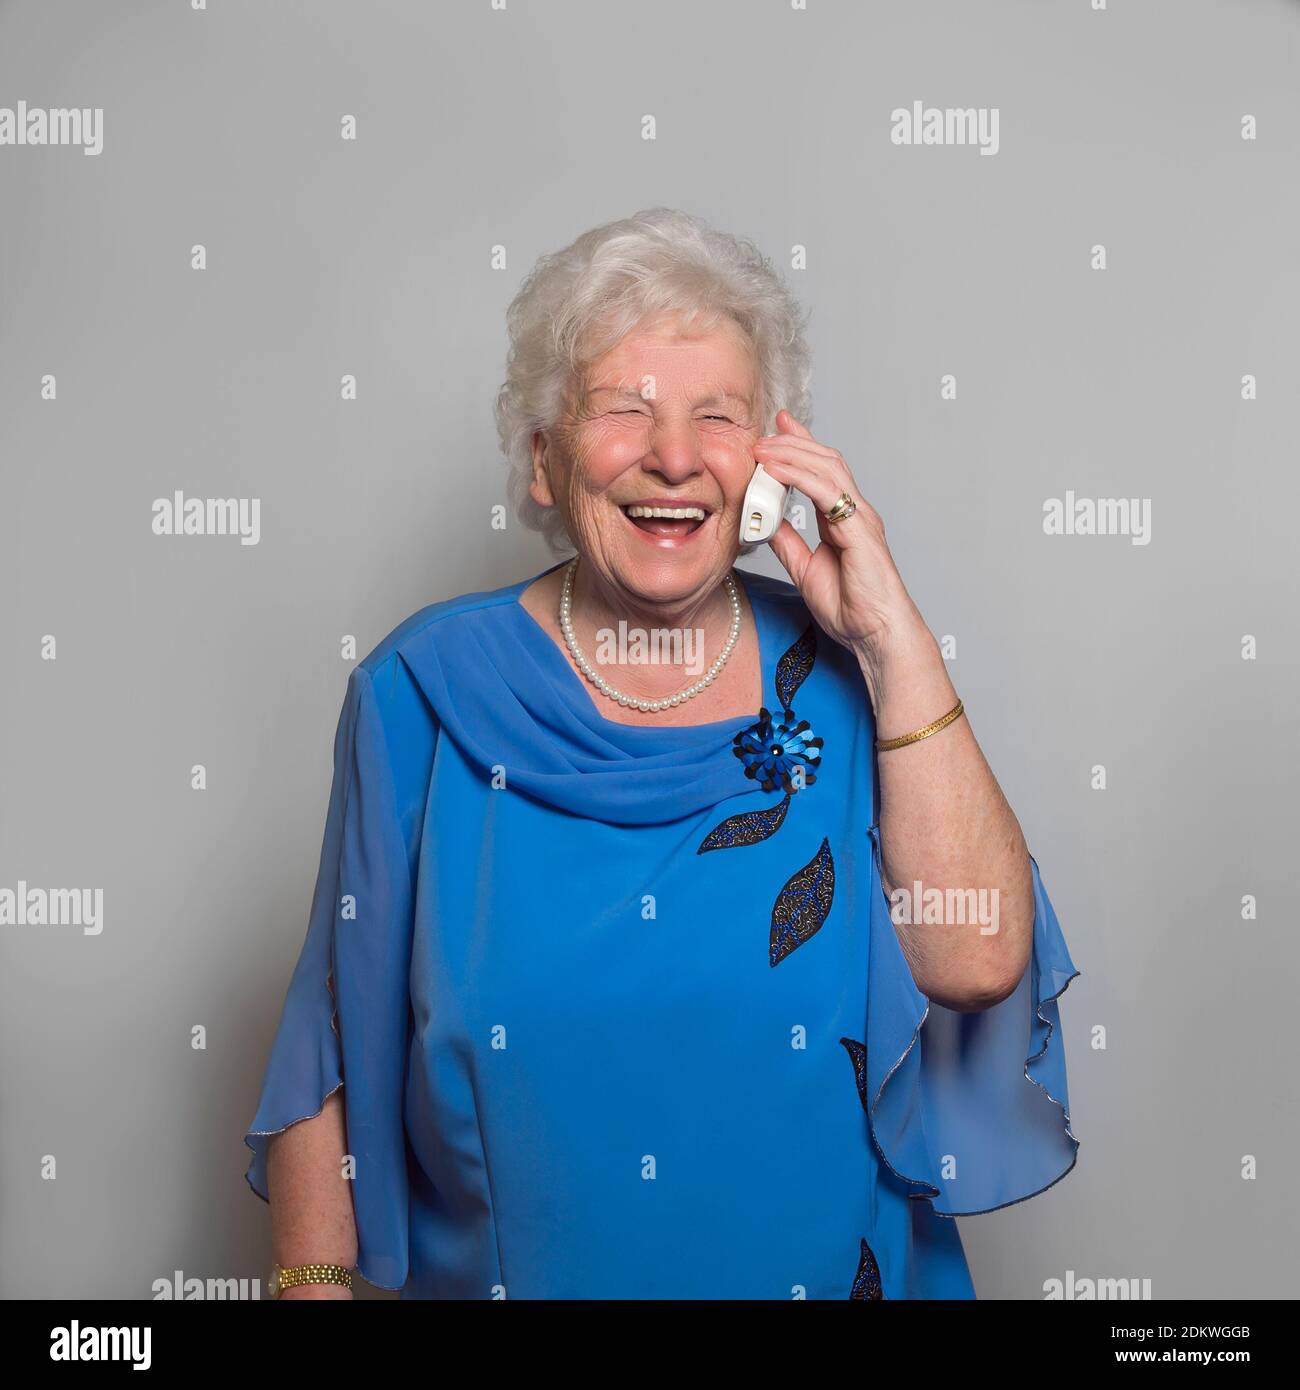 80 Year Old Woman On The Phone. She Is Happy To Receive Calls During Isolation Stock Photo